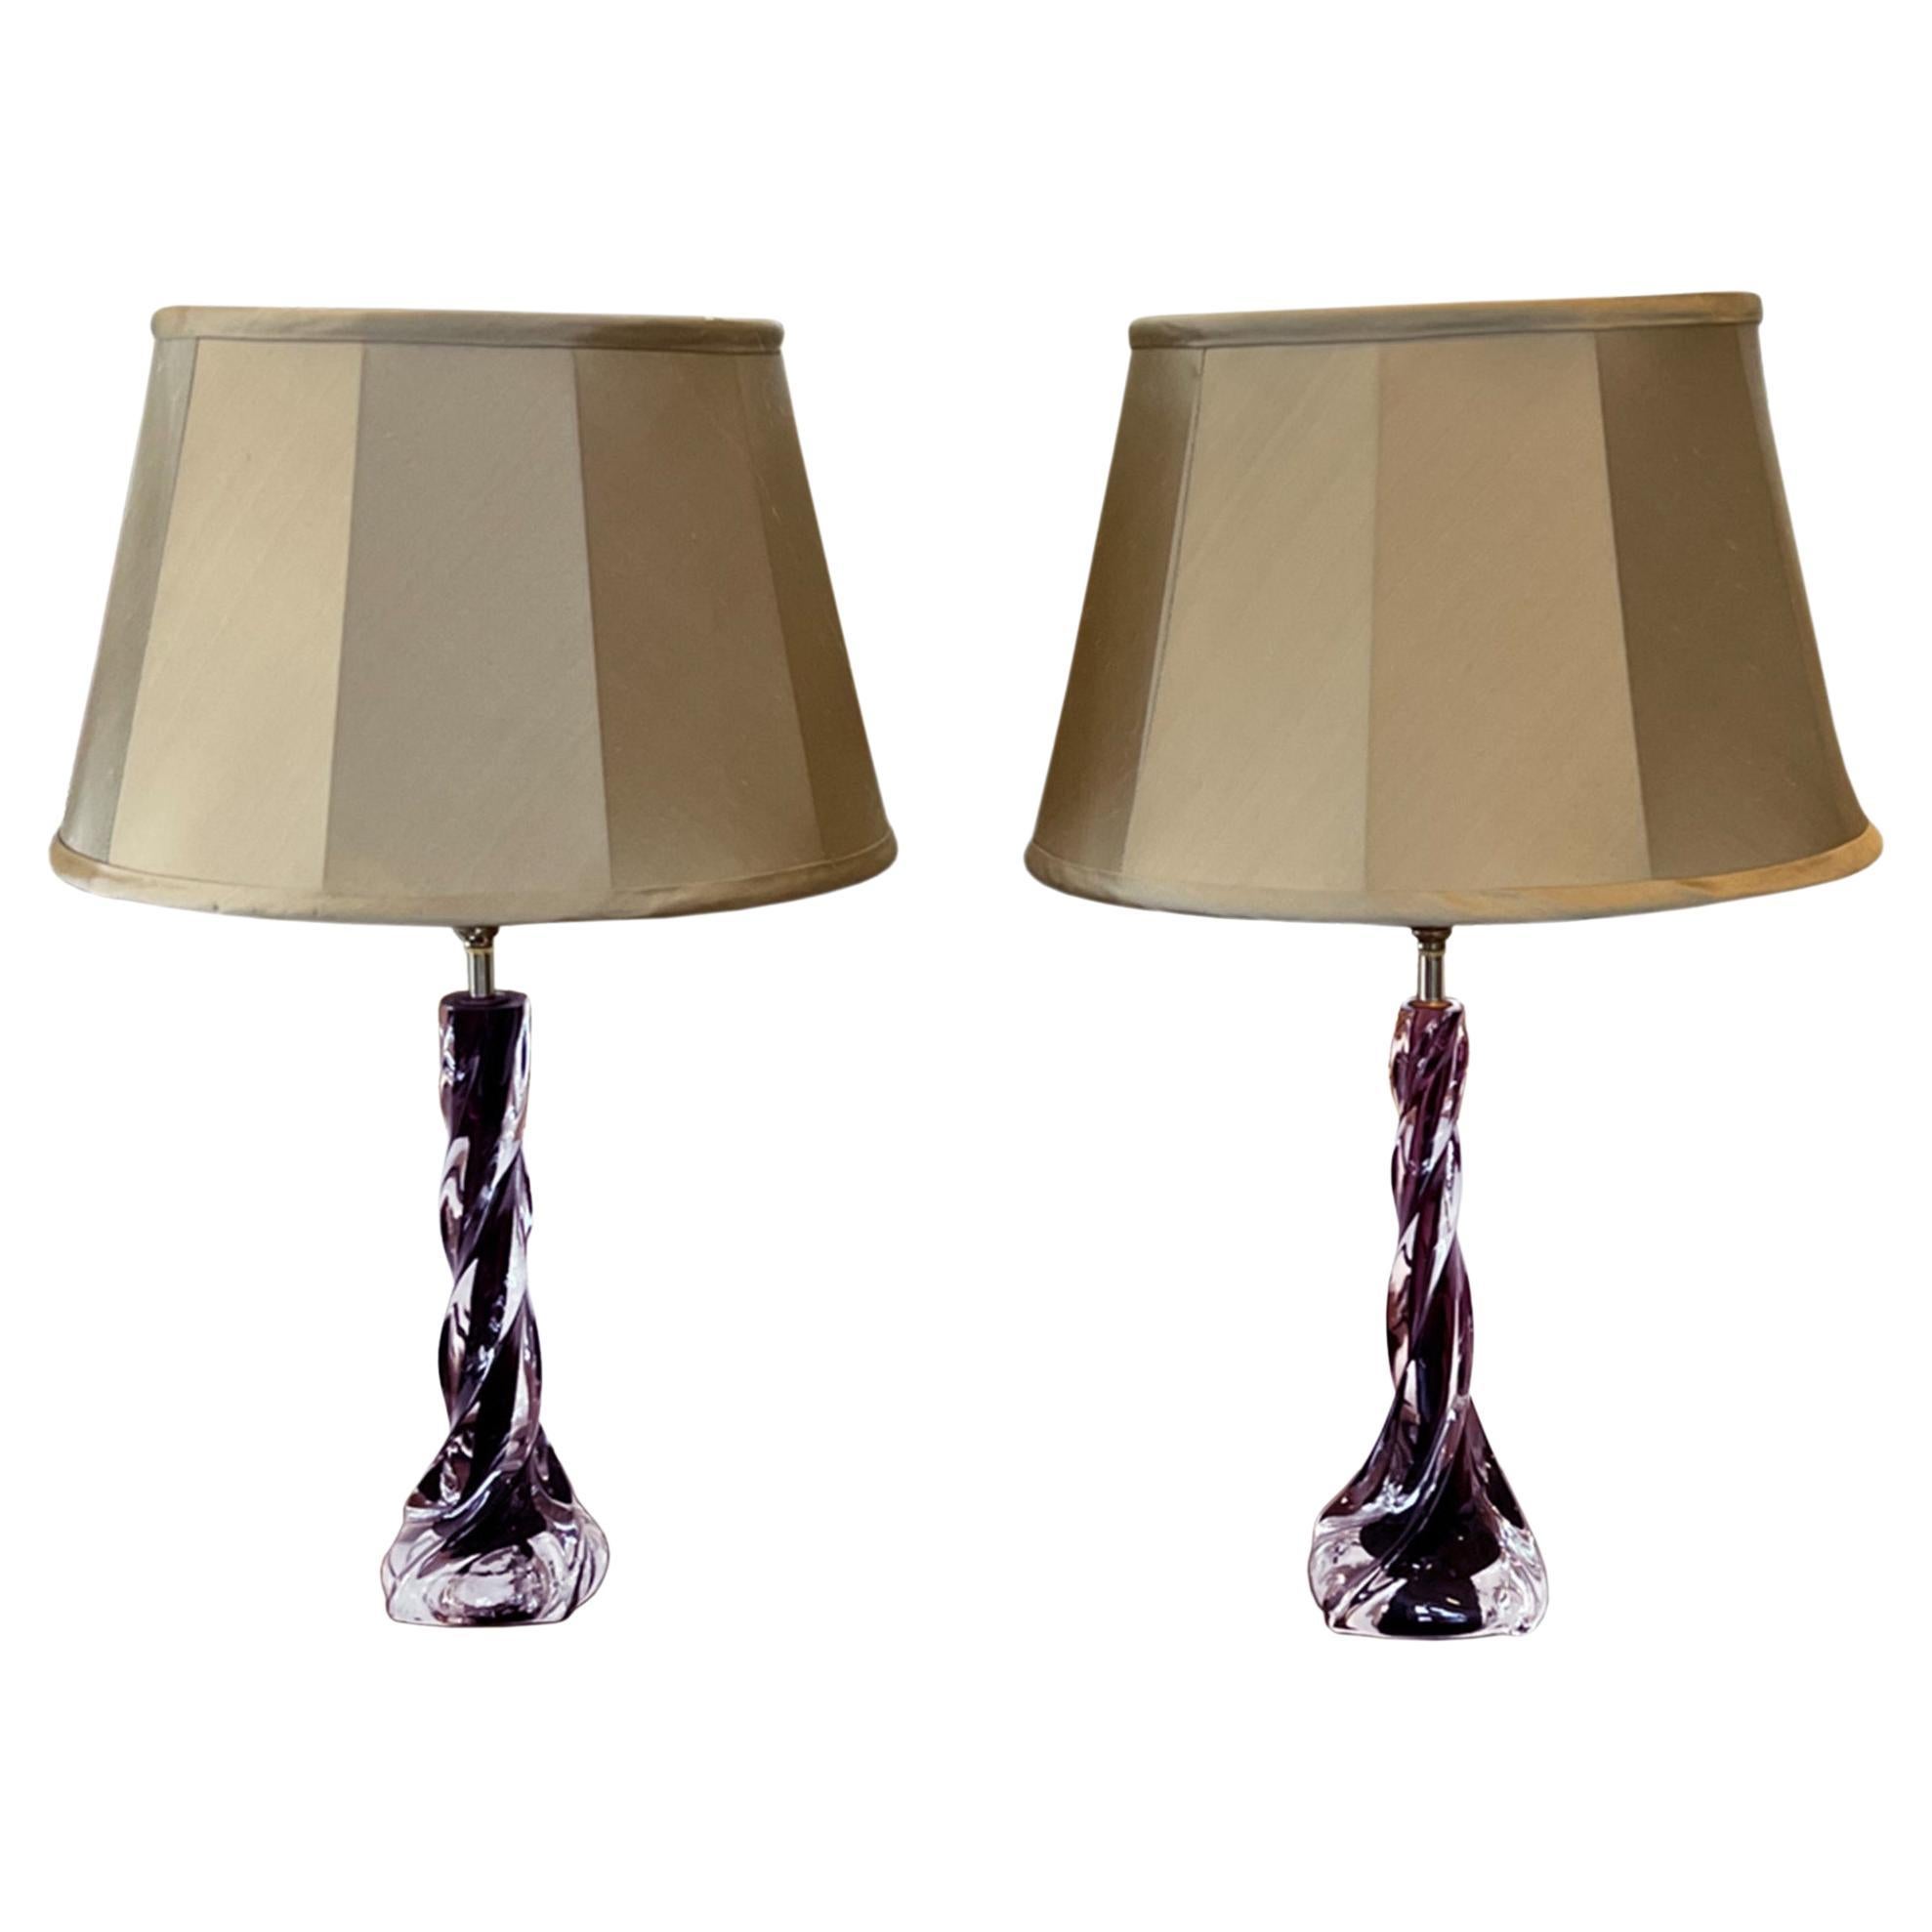 Pair of Small Purple Twisted Flygsfors Table Lamps